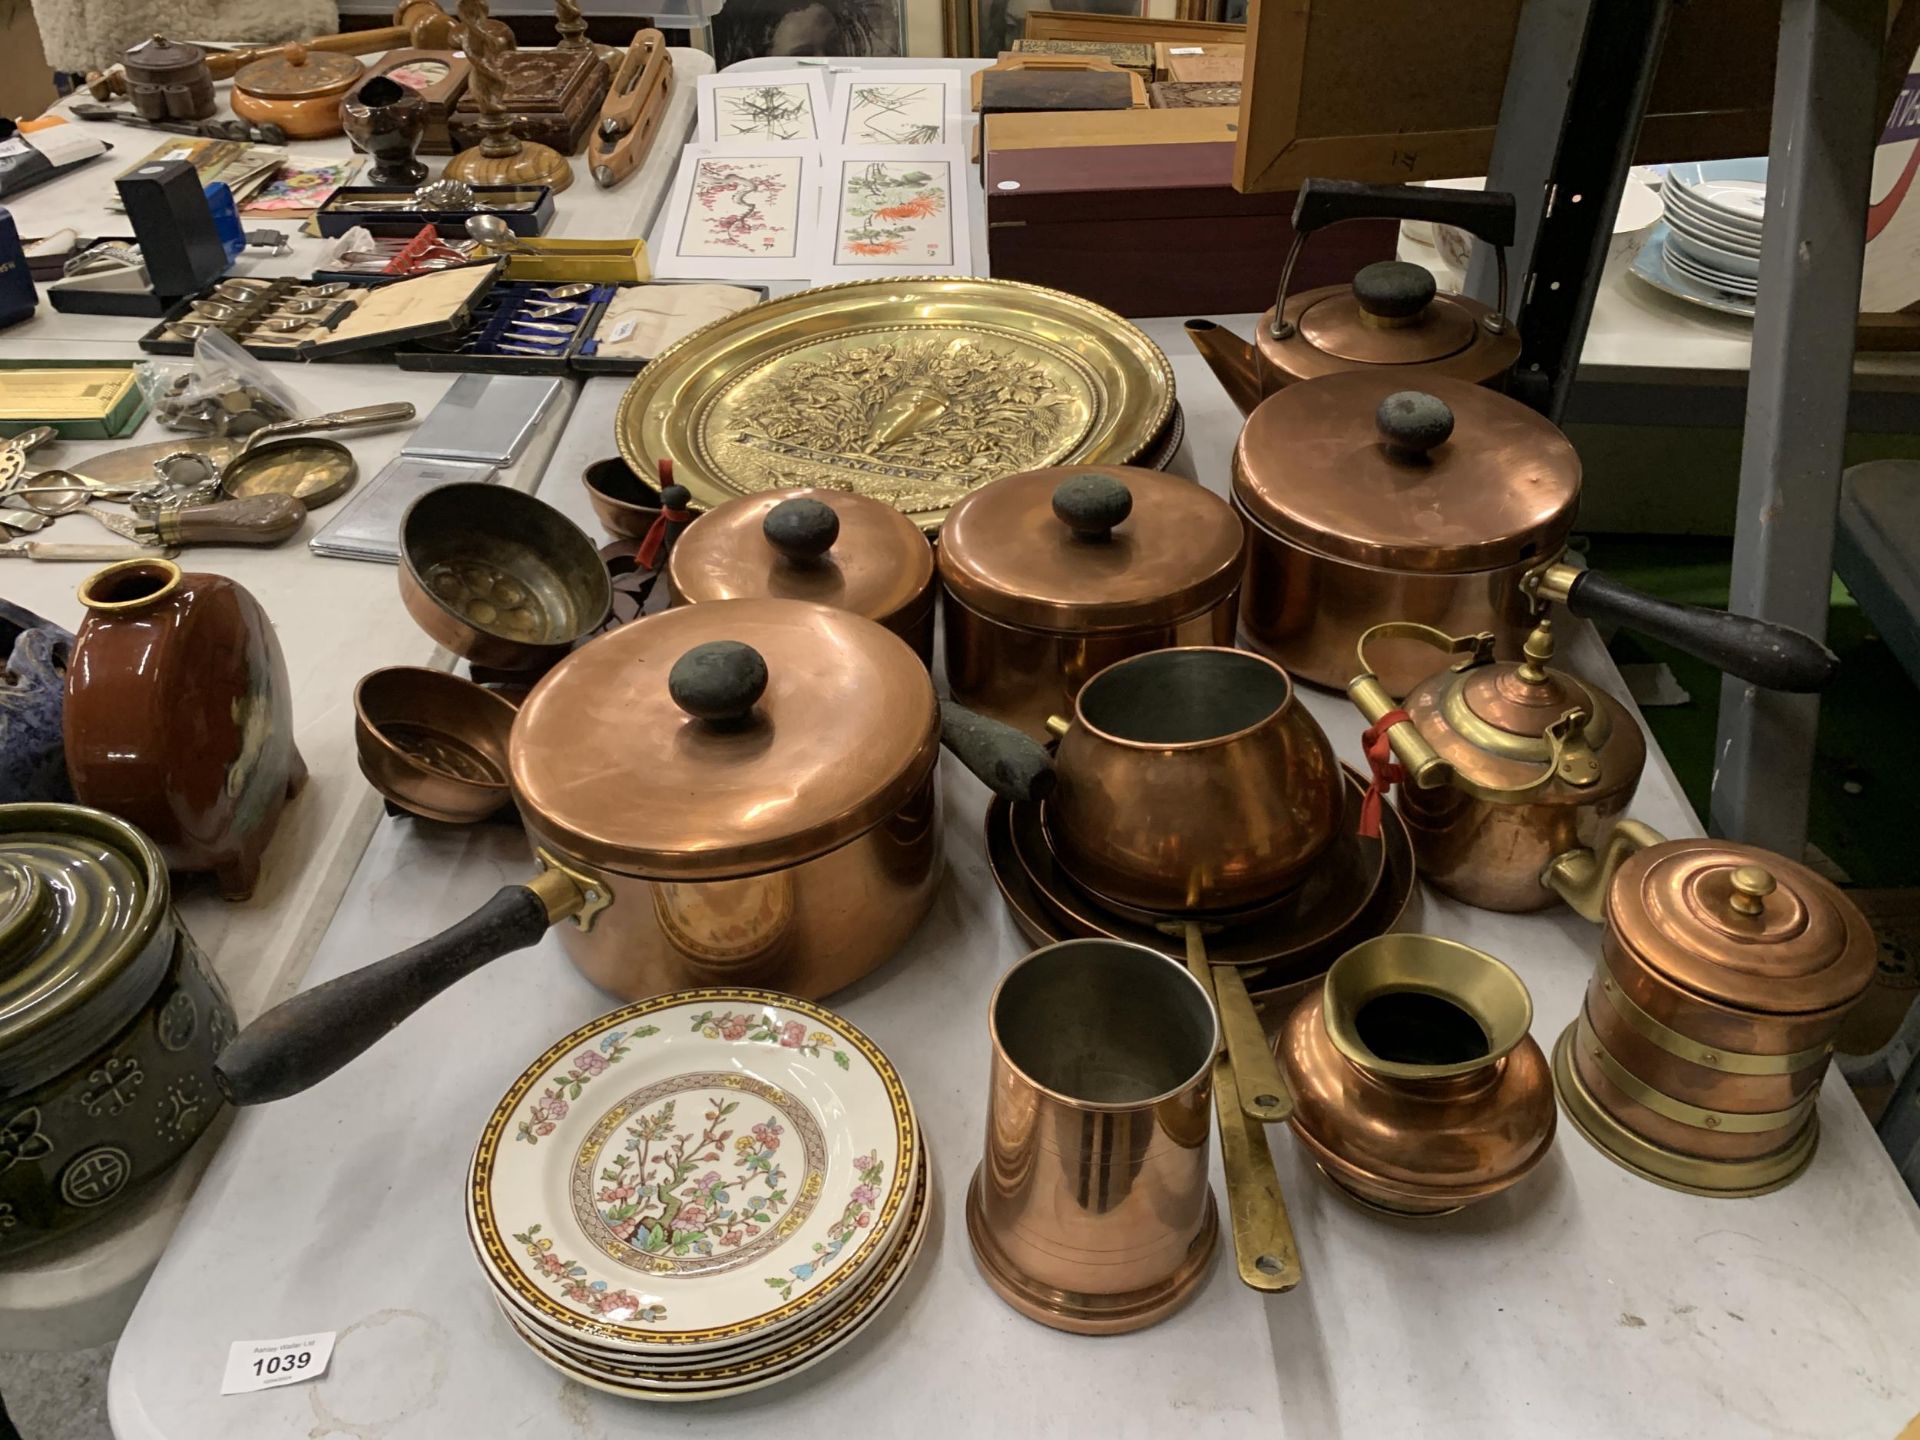 A MIXED LOT OF BRASSWARE FEATURING TRAGUS WARE, LINTON WARE. TO INCLUDE POTS, PANS, TEAPOT AND JELLY